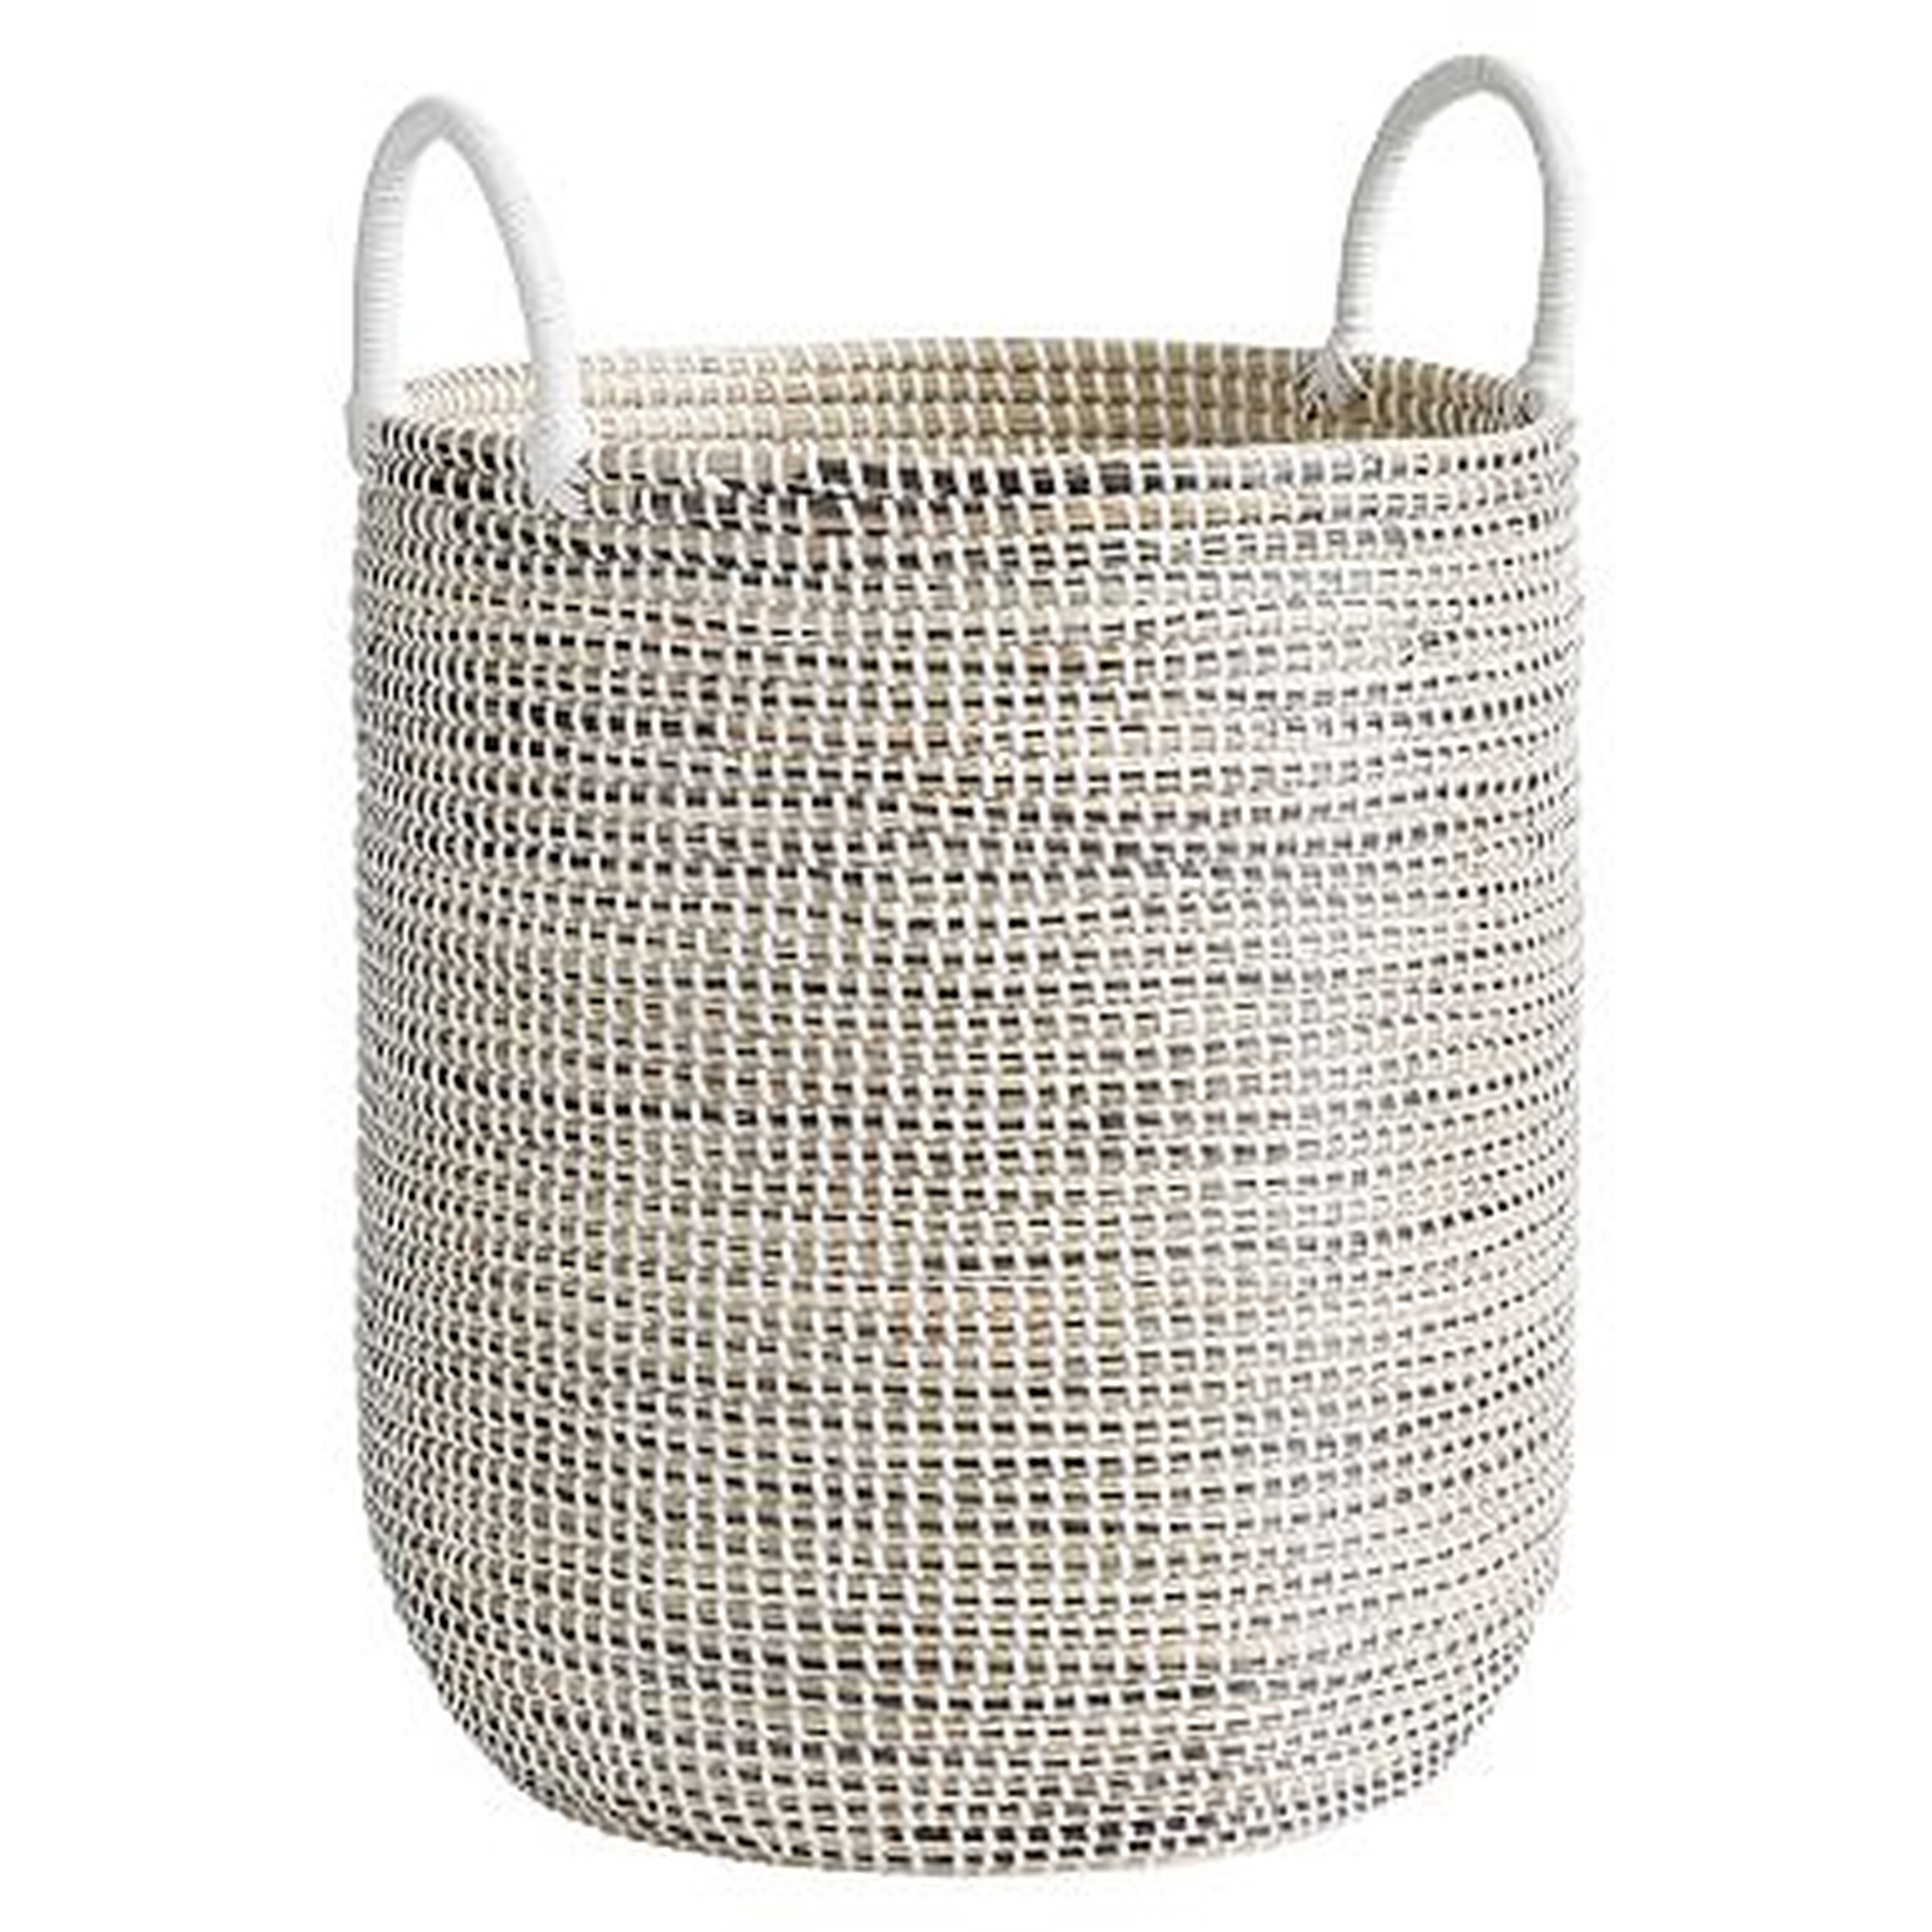 Woven Seagrass Catchall, Natural - Pottery Barn Teen